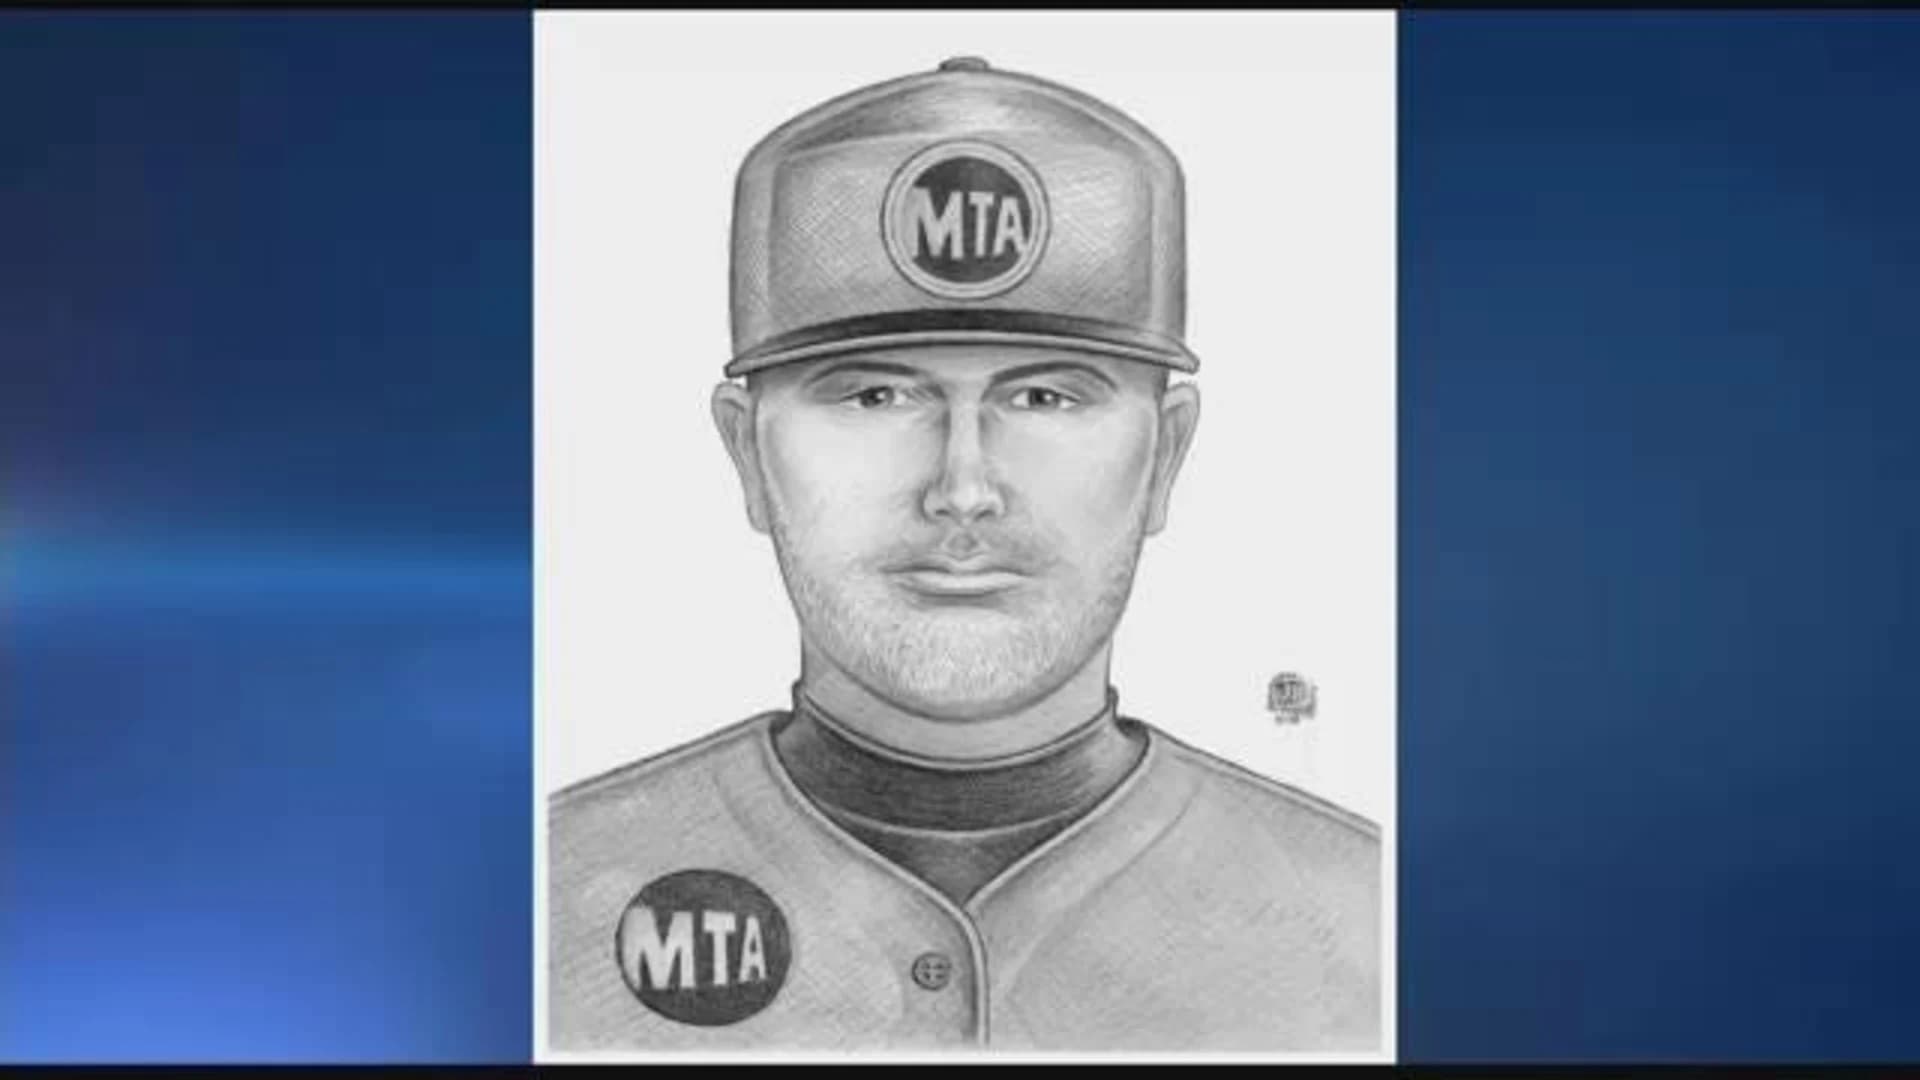 Police: Man dressed in MTA apparel exposed himself to 2 young girls